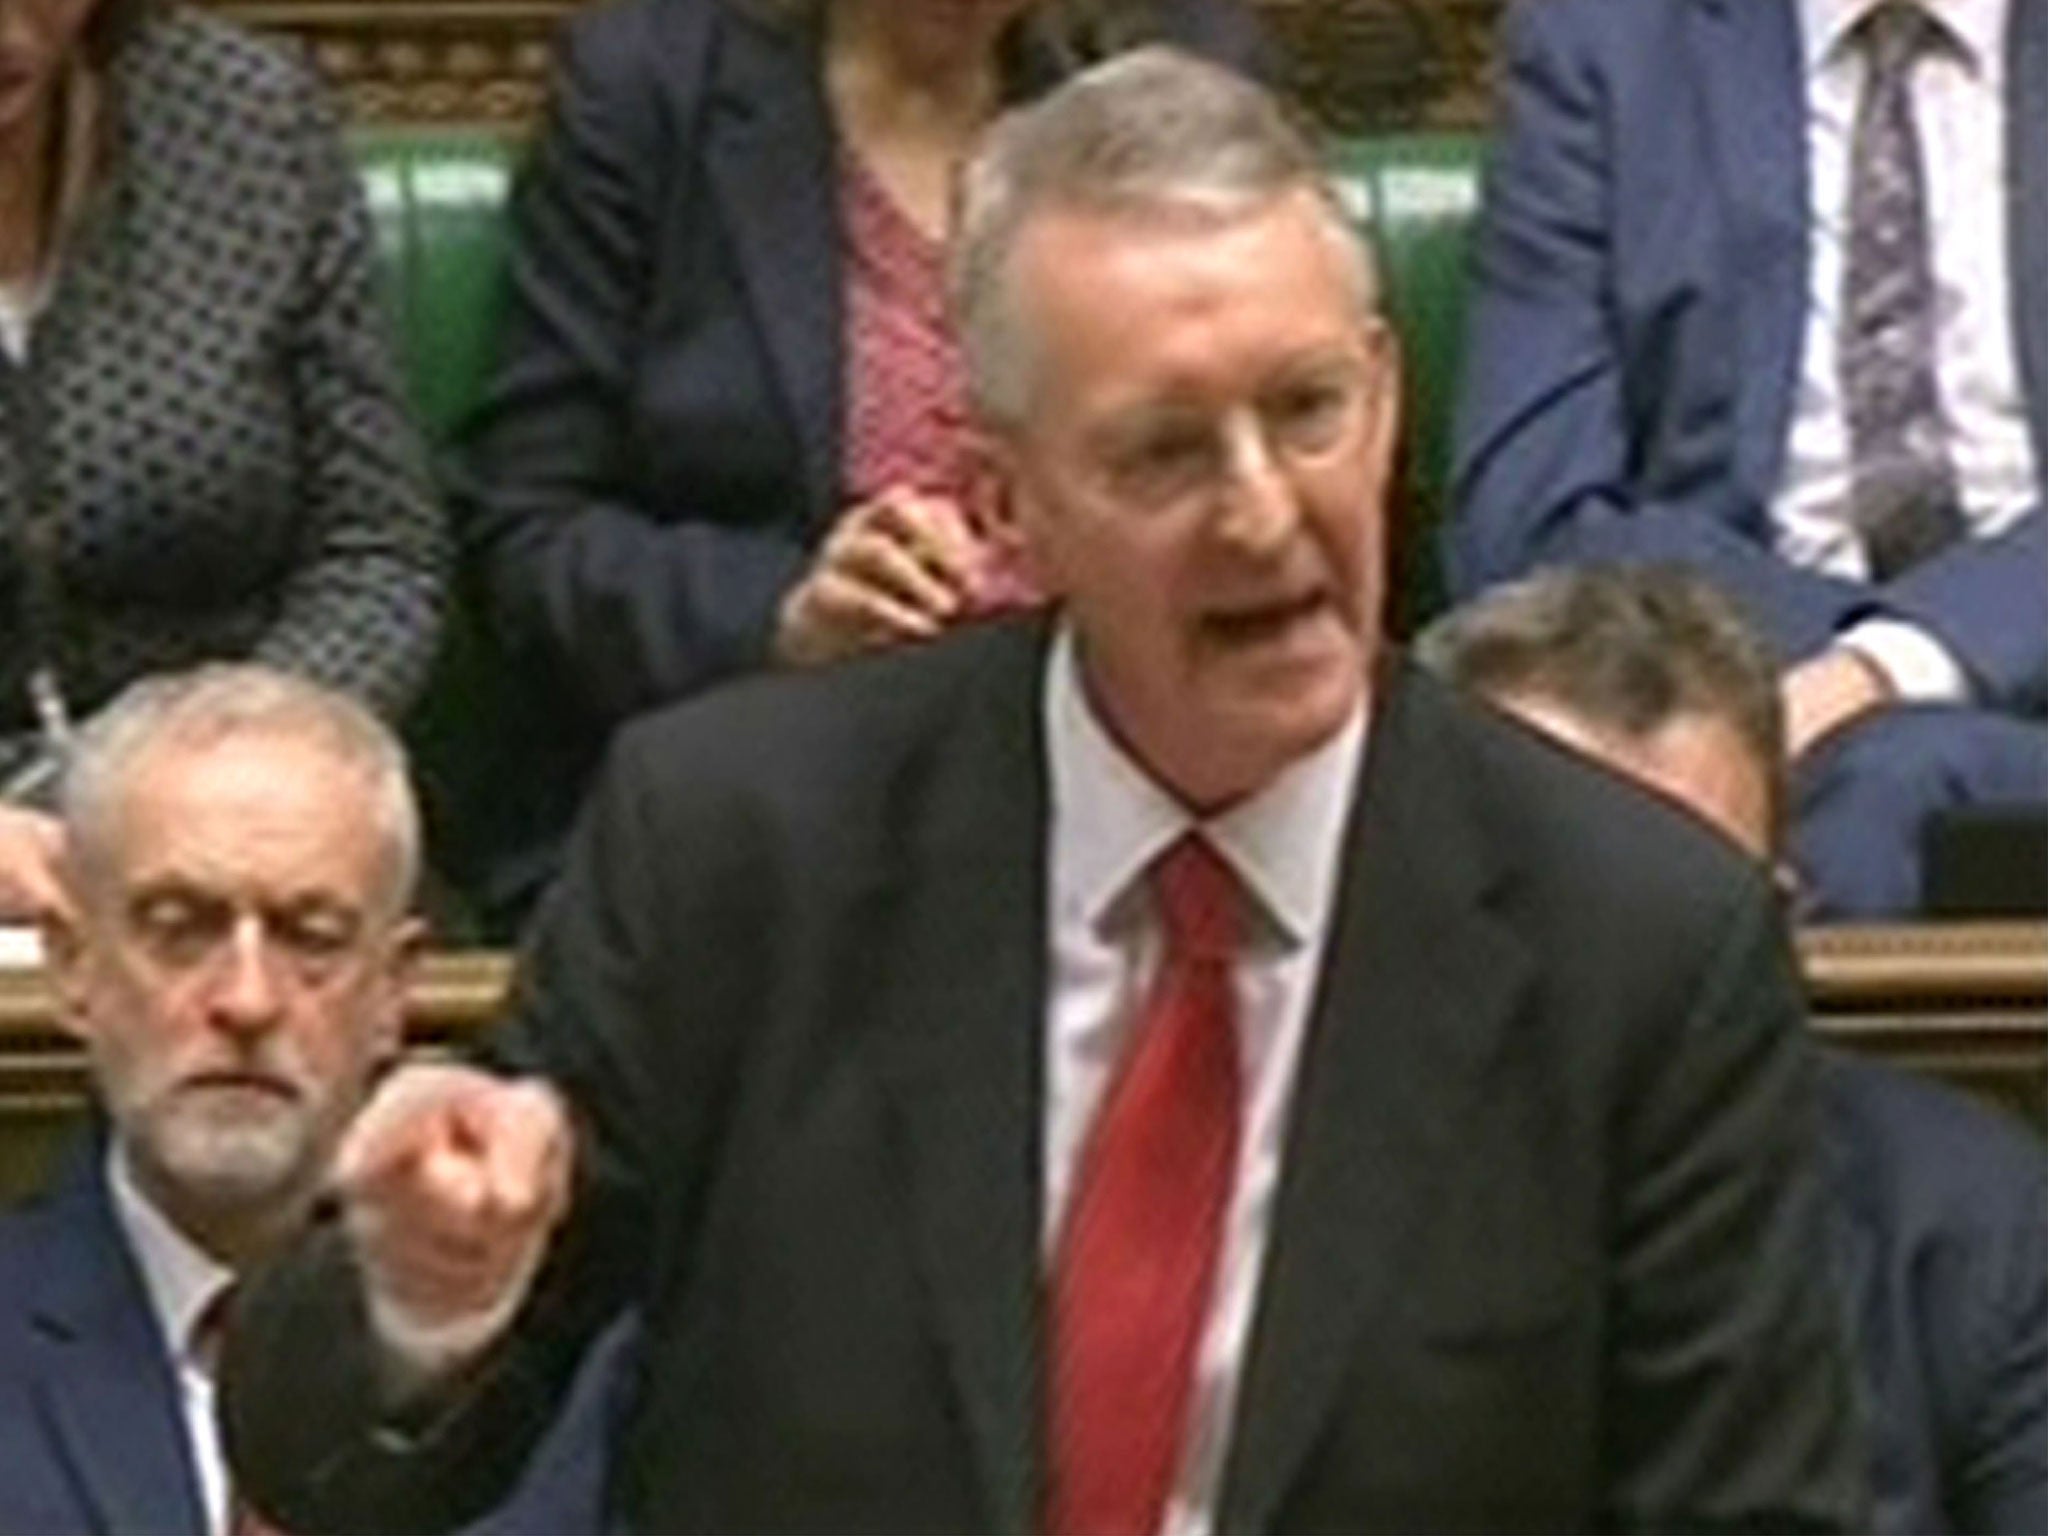 Hilary Benn delivers his call for military action against Isis targets in Syria